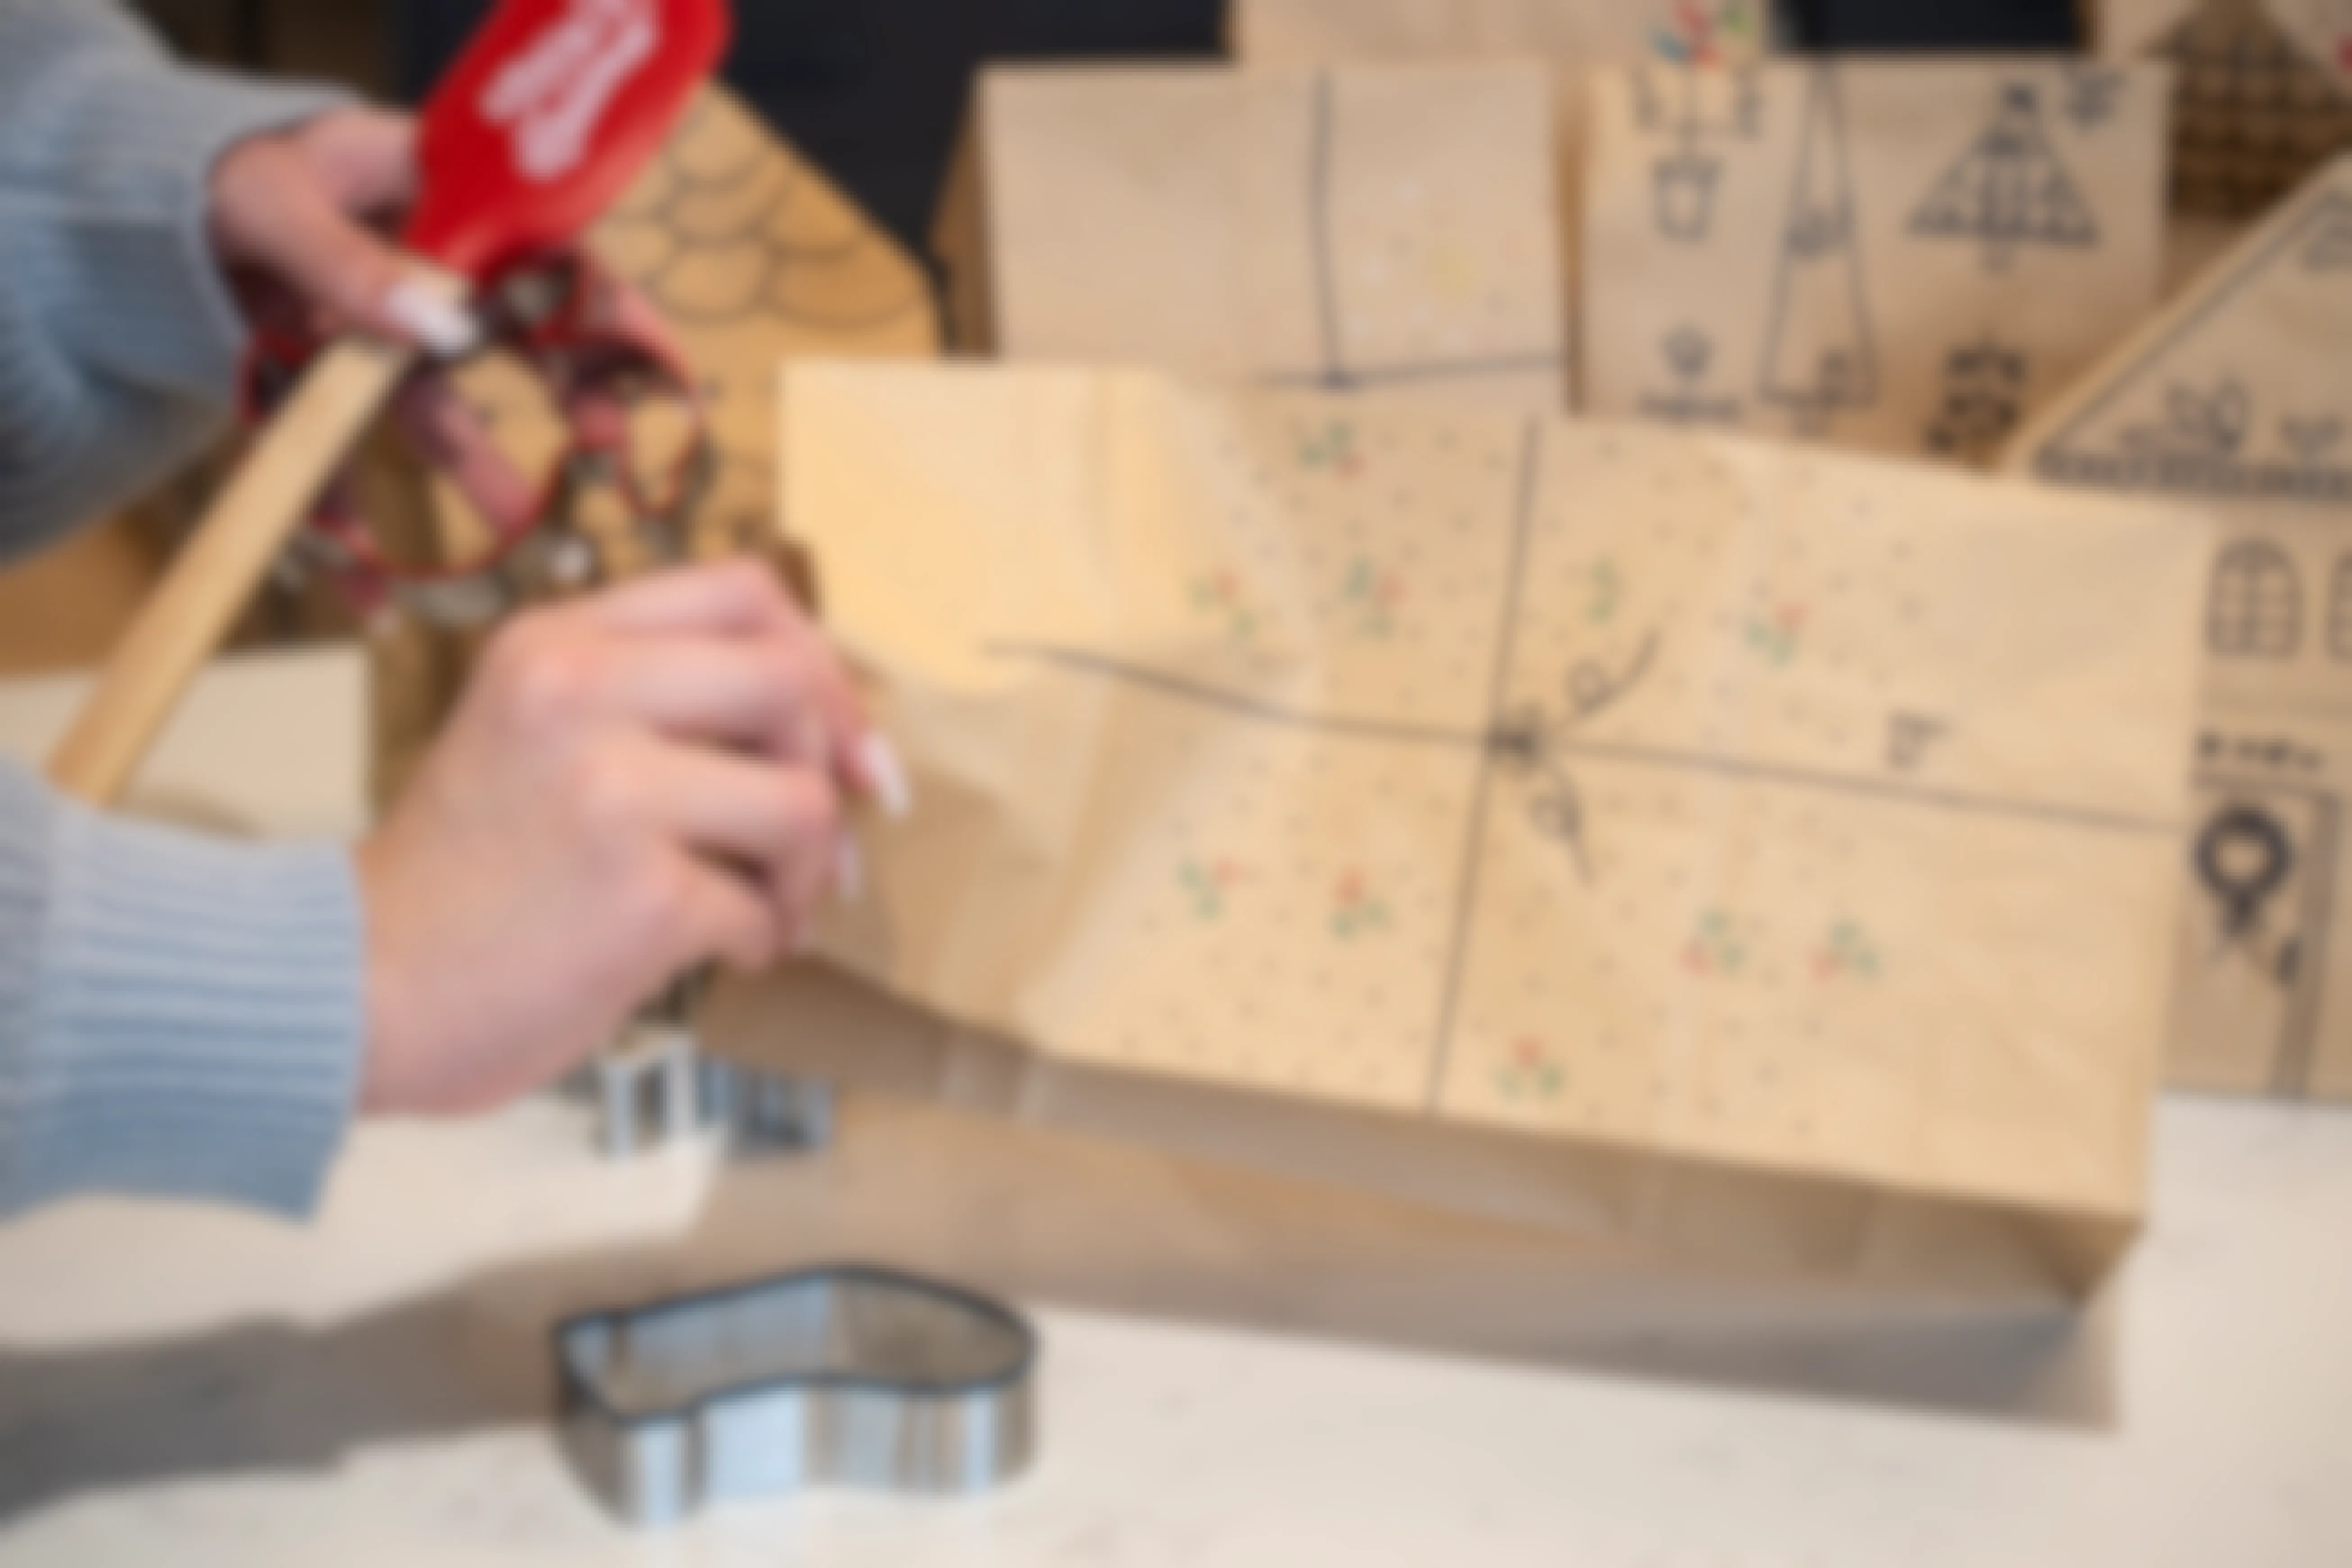 Someone putting baking supplies into a paper bag decorated for Christmas